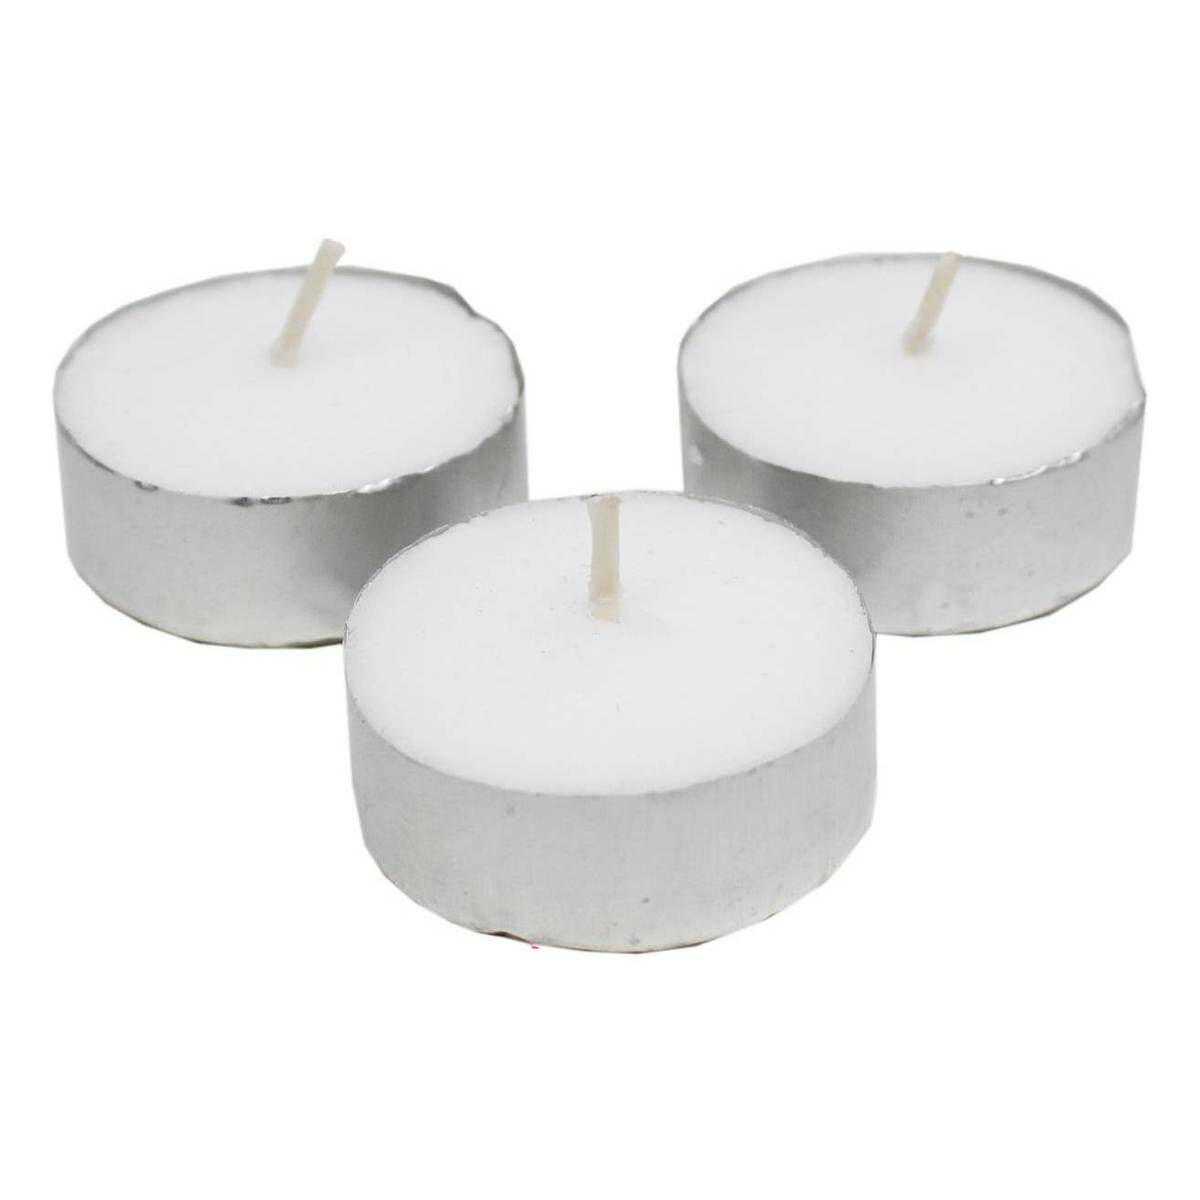 Tealights Small Candles All Quantities Large T Lights Large Tea Lights 